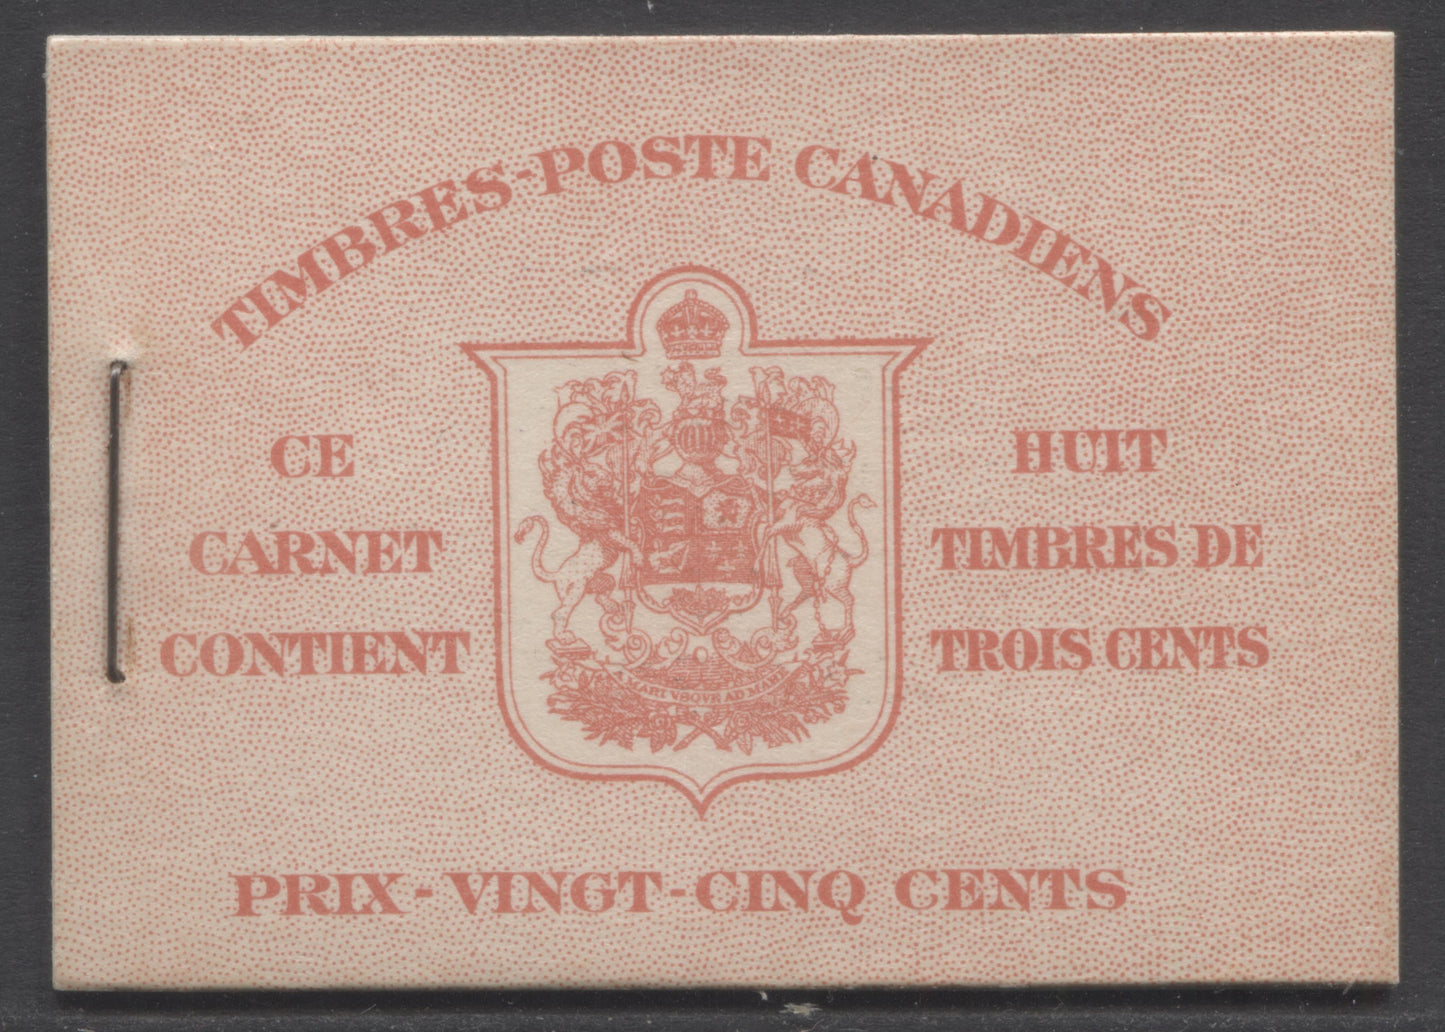 Lot 68 Canada #BK34dF 1942-1947 War Issue, A Complete 25c French Booklet, 2 Panes Of 4+2 Labels 3c Dark Carmine, Front Cover IIo, Type 1B Cover, Surcharged Rate Page, 560,000 Issued